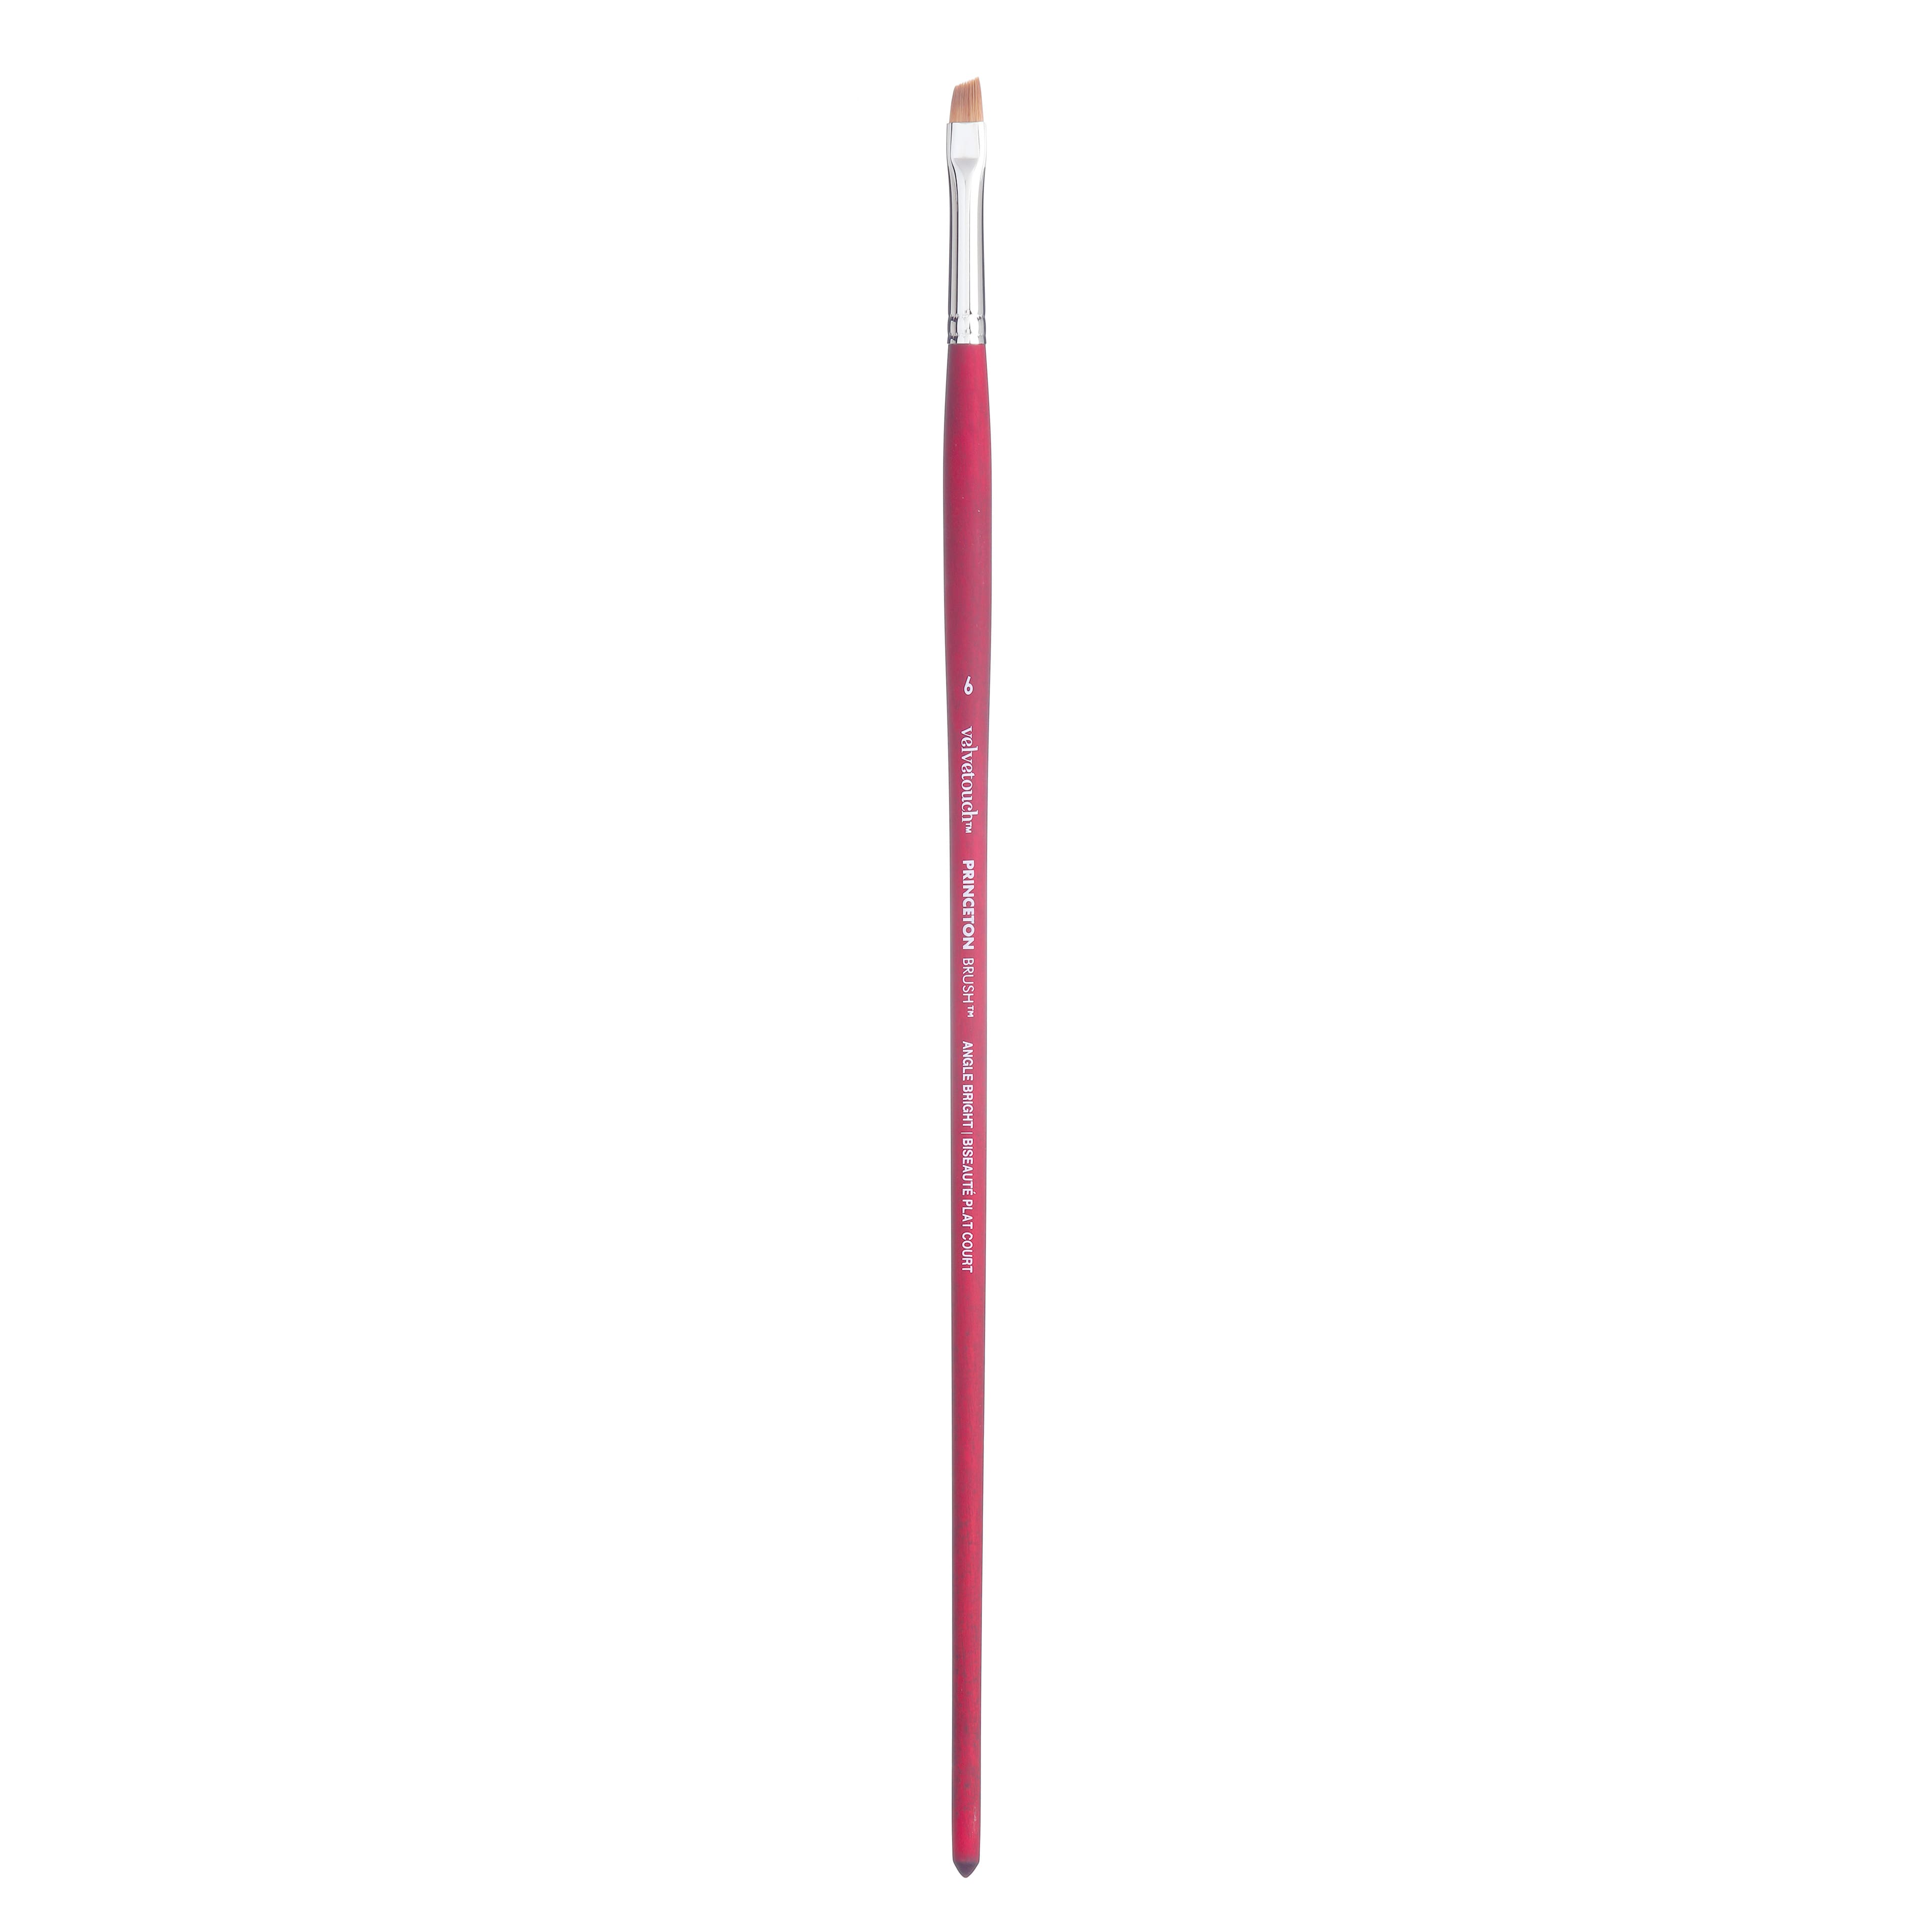 Princeton&#x2122; Velvetouch&#x2122; Series 3900 Long Handle Angle Bright Brush, Size 6